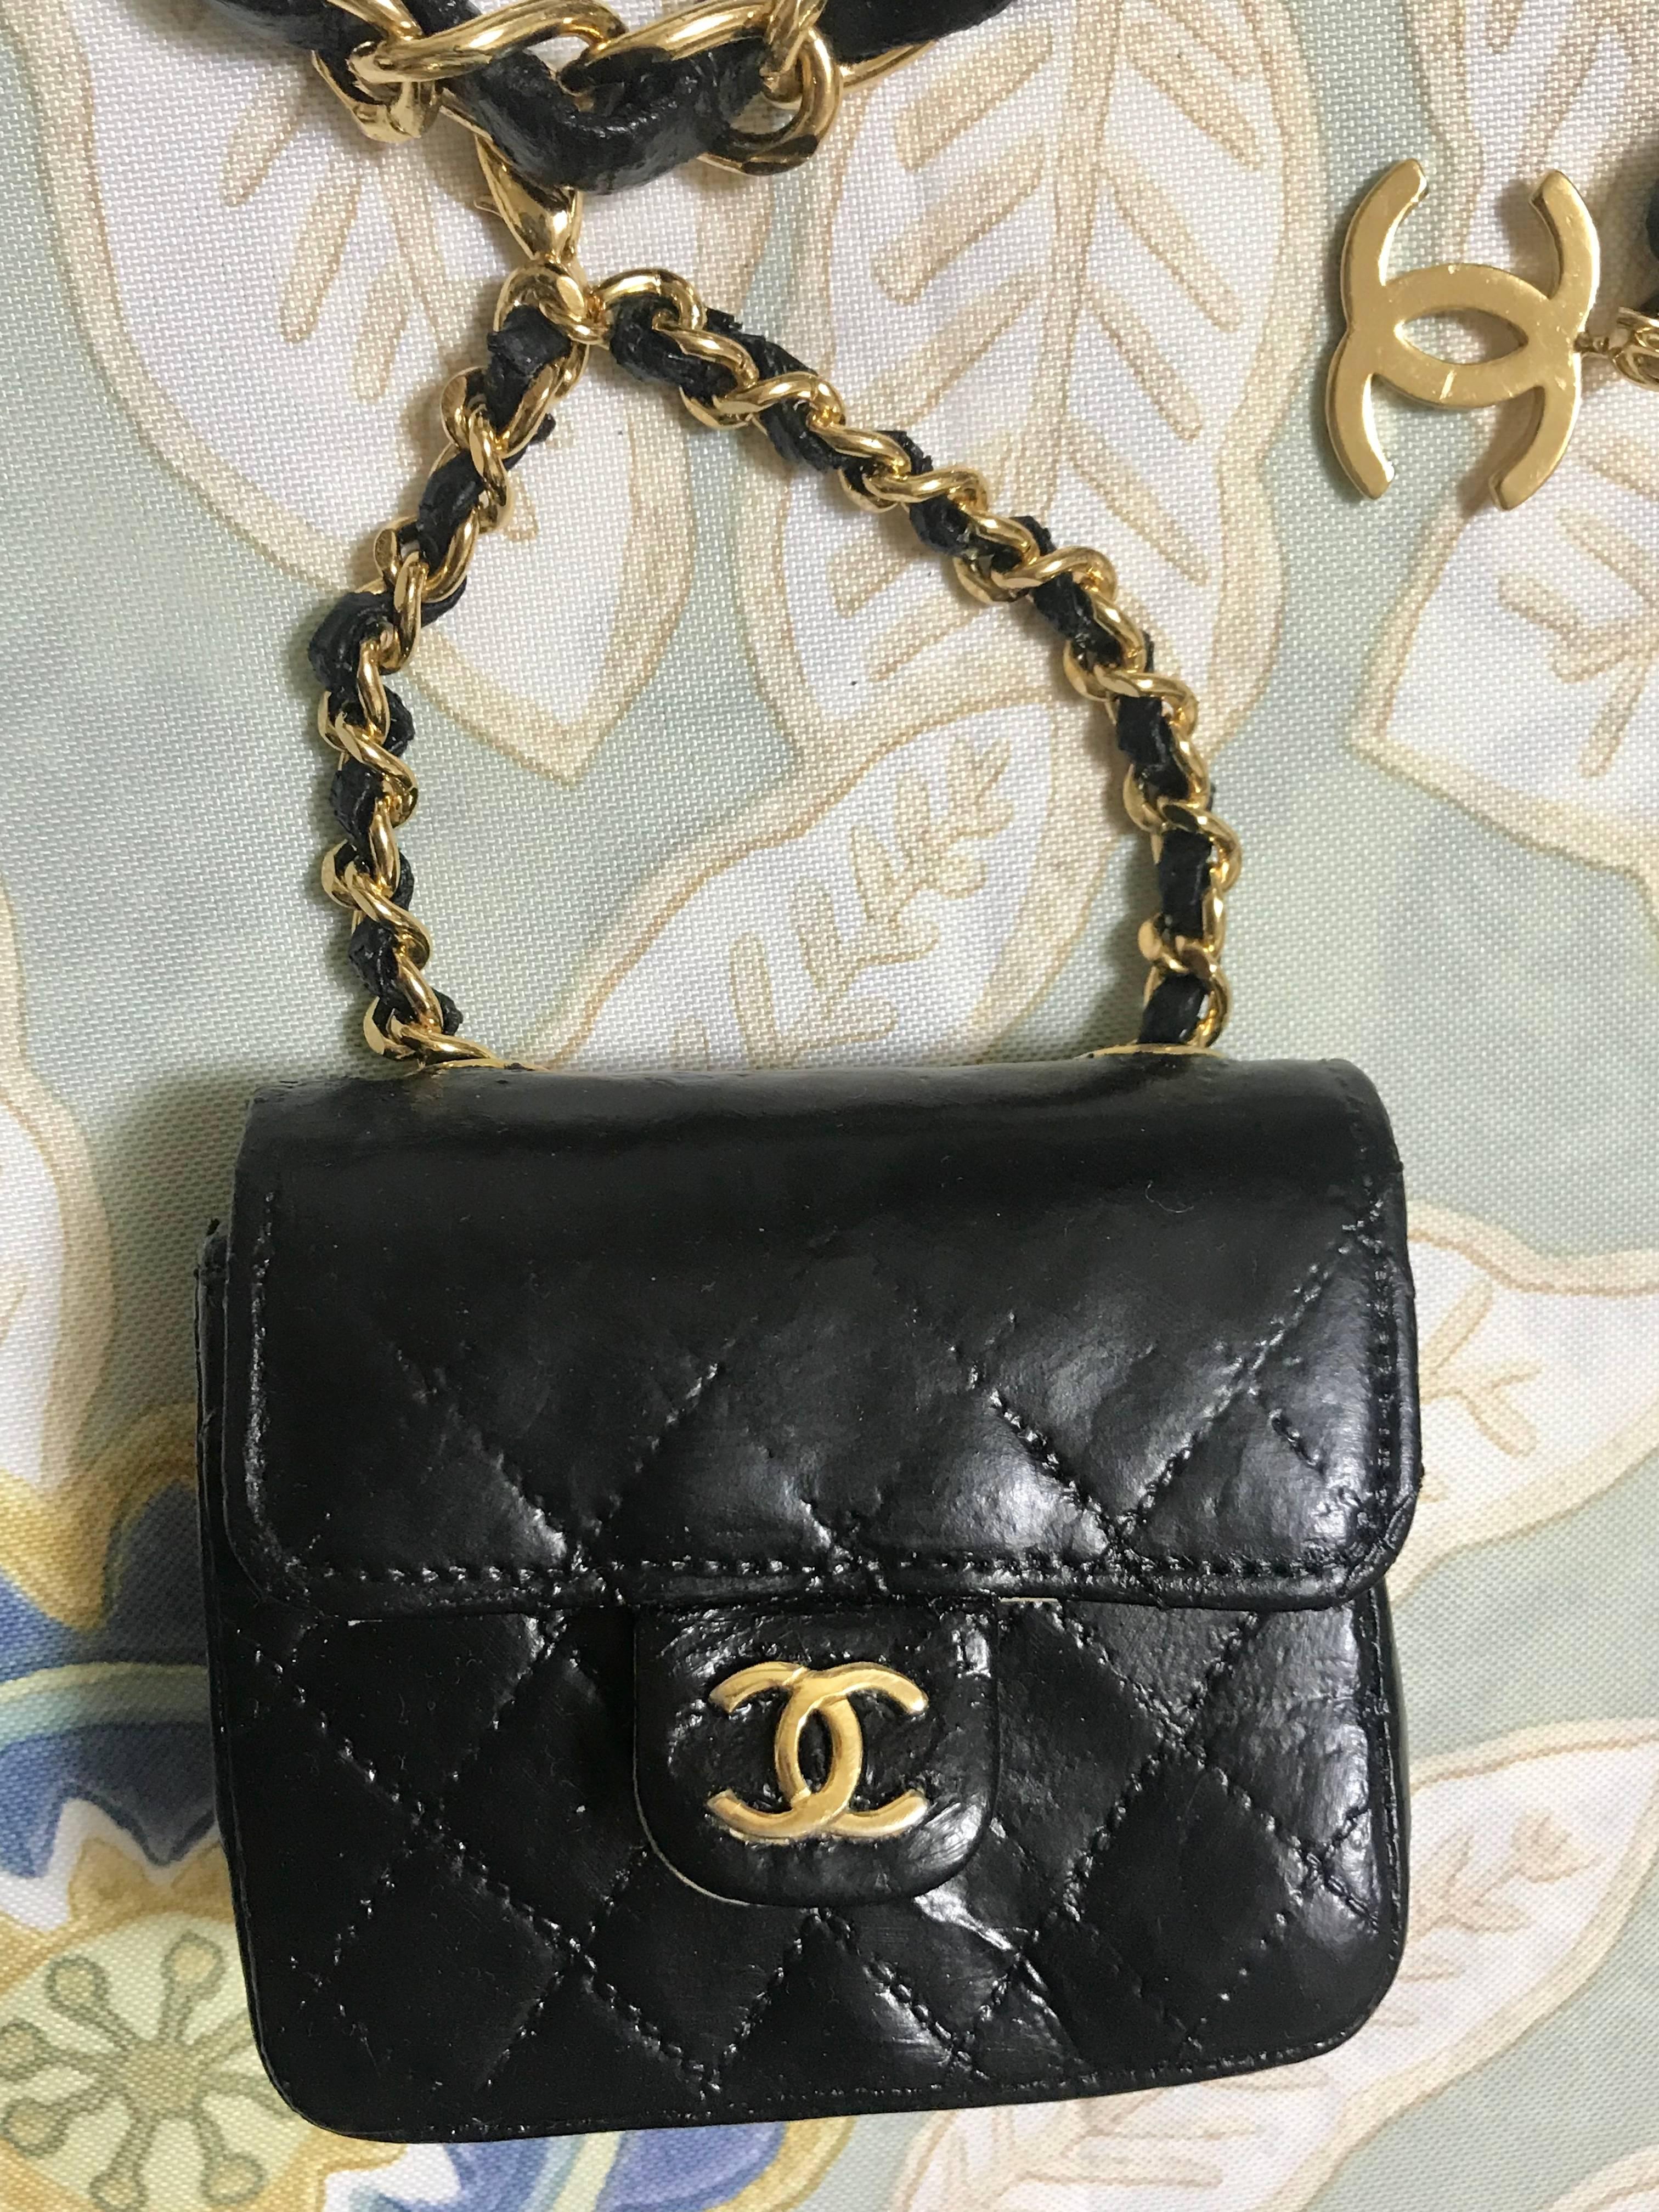 1980s. Vintage CHANEL lambskin mini 2.55 bag charm chain leather belt with golden CC charm. Must have.

Vintage CHANEL black lambskin mini 2.55 bag charm chain leather belt with CC motif.

Here is another fabulous piece from CHANEL back in the era